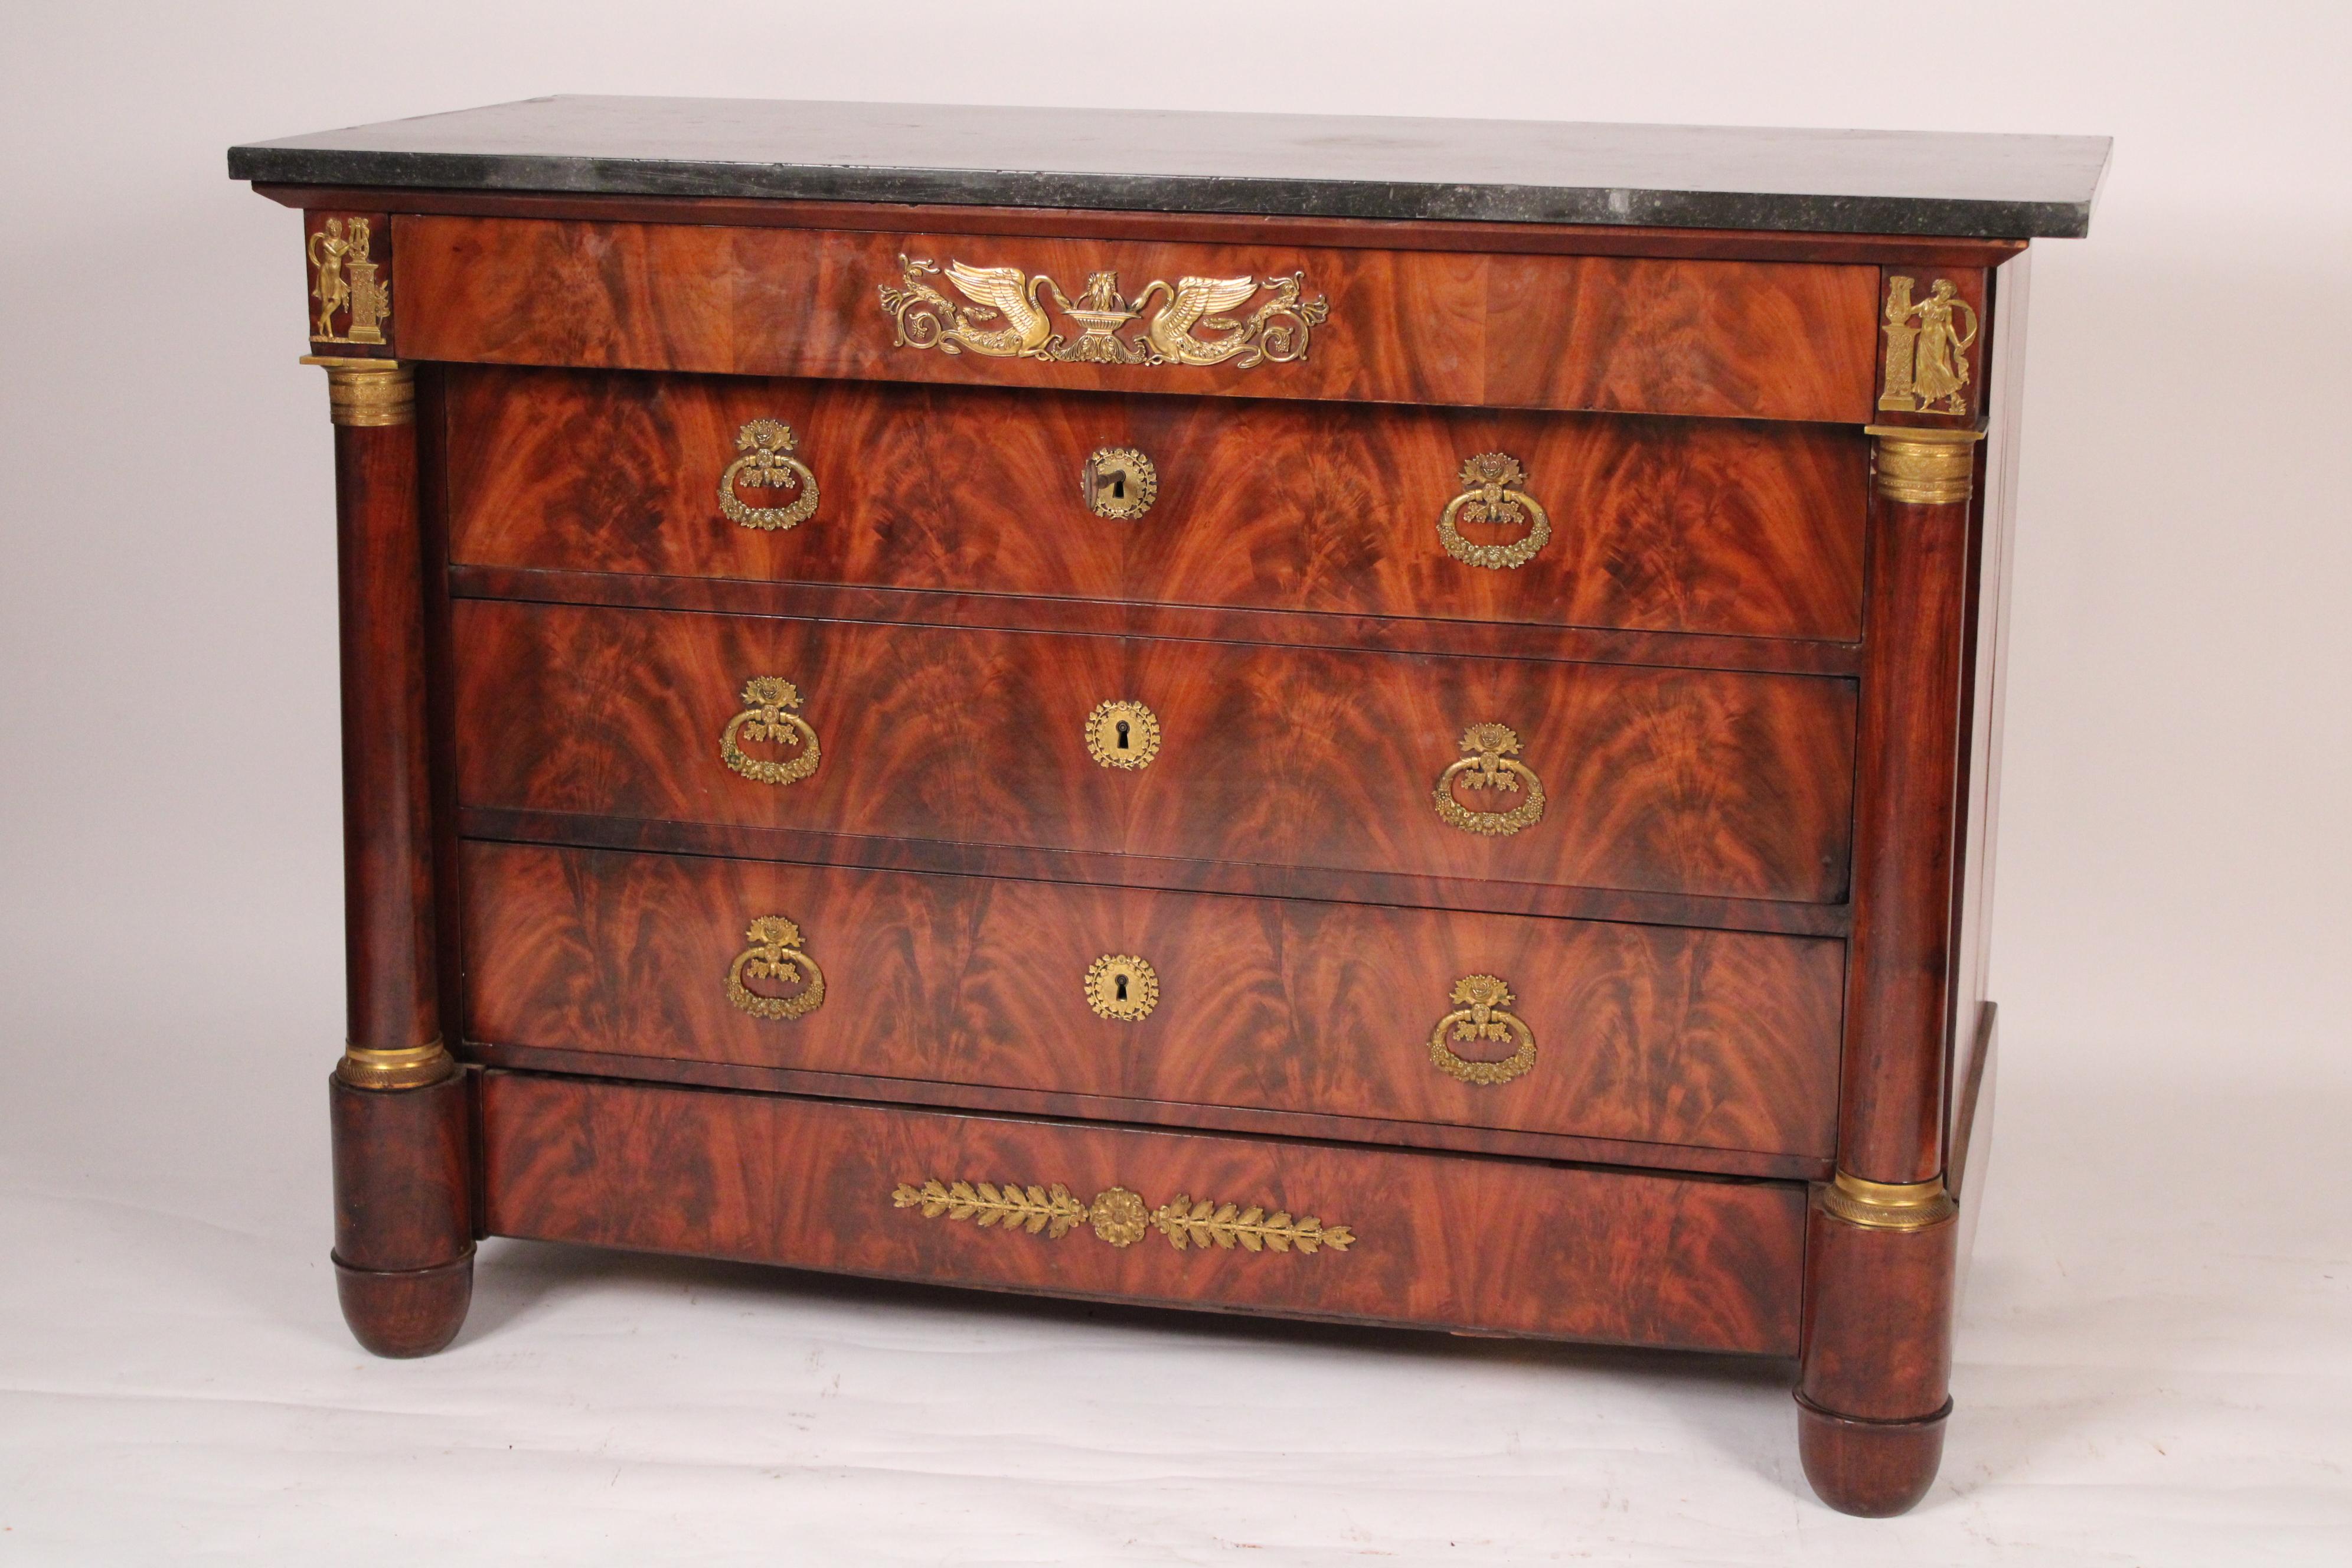 European Antique Empire Flame Mahogany Chest Of Drawers For Sale